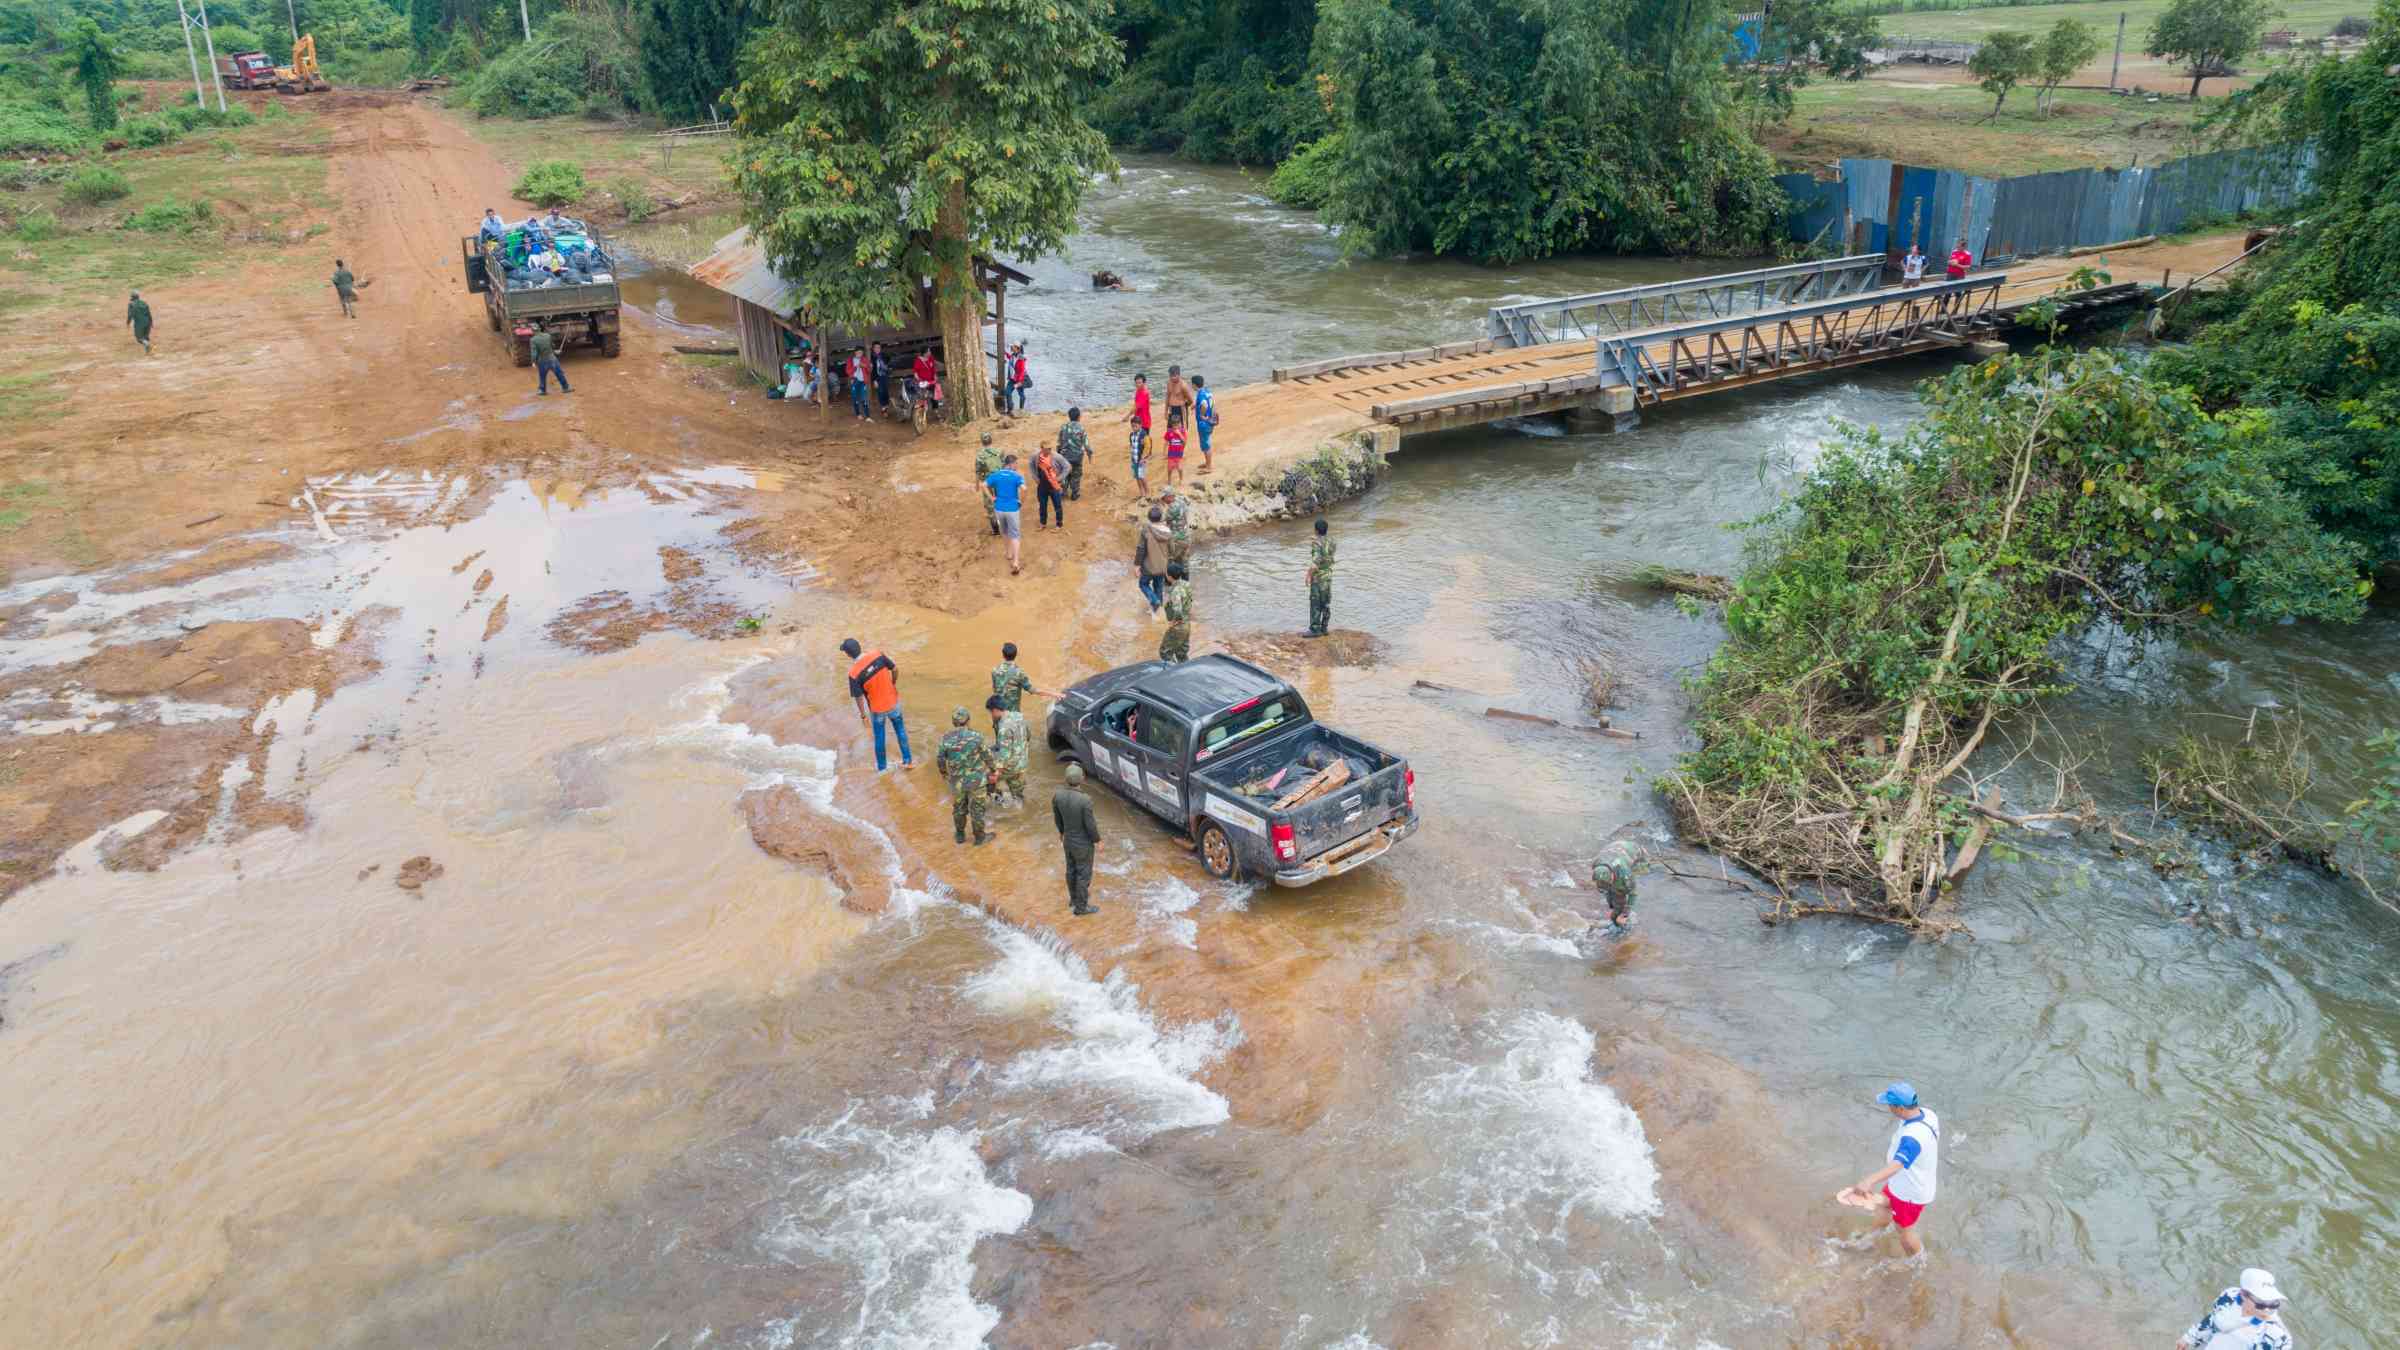 Floods in Sanamxay district, Lao PDR